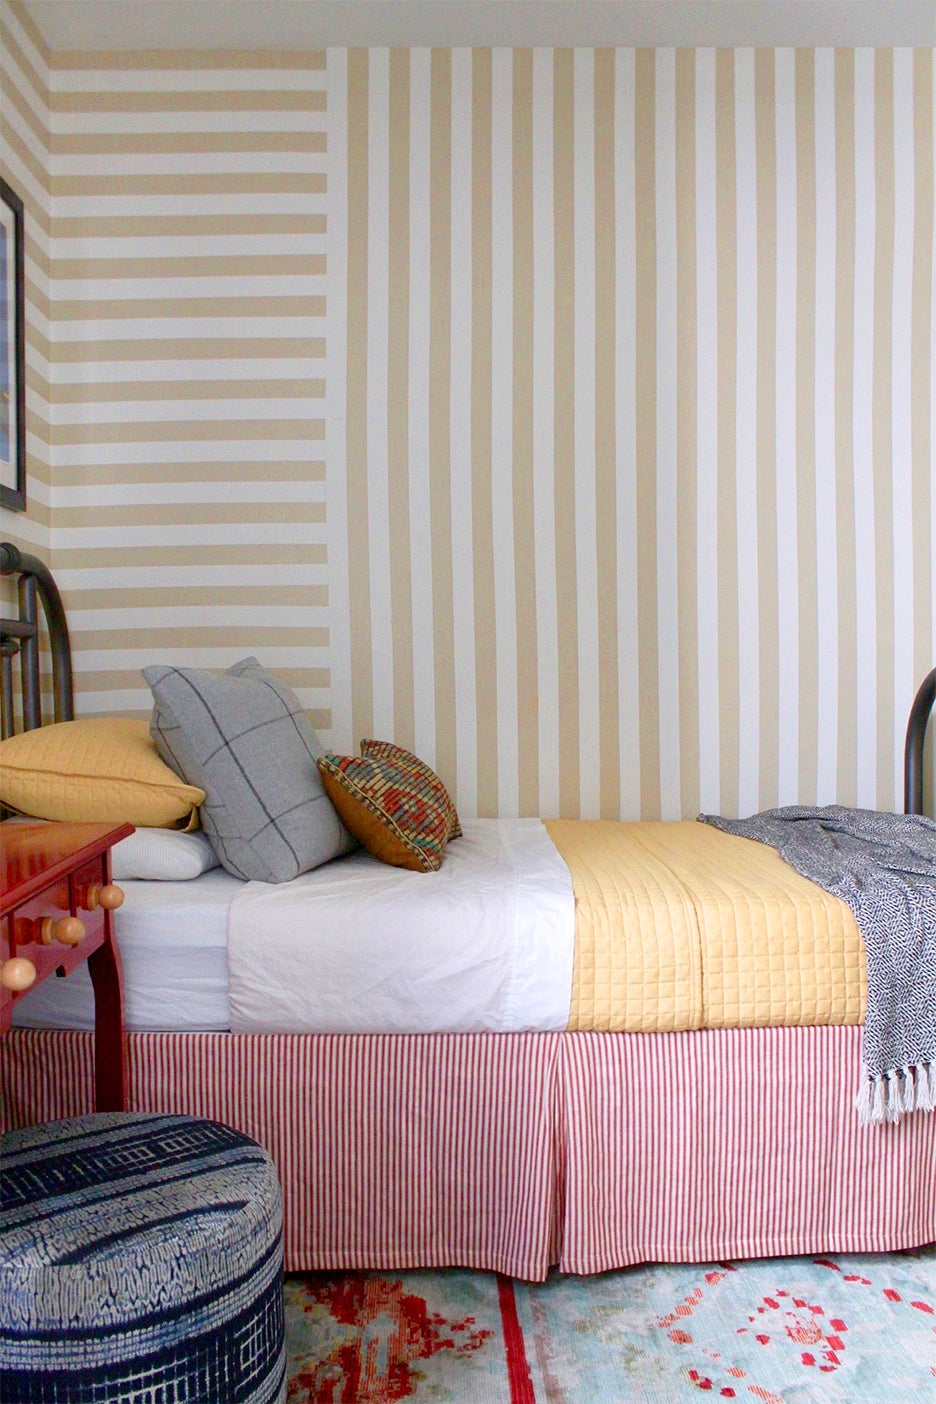 Kids room with striped wall